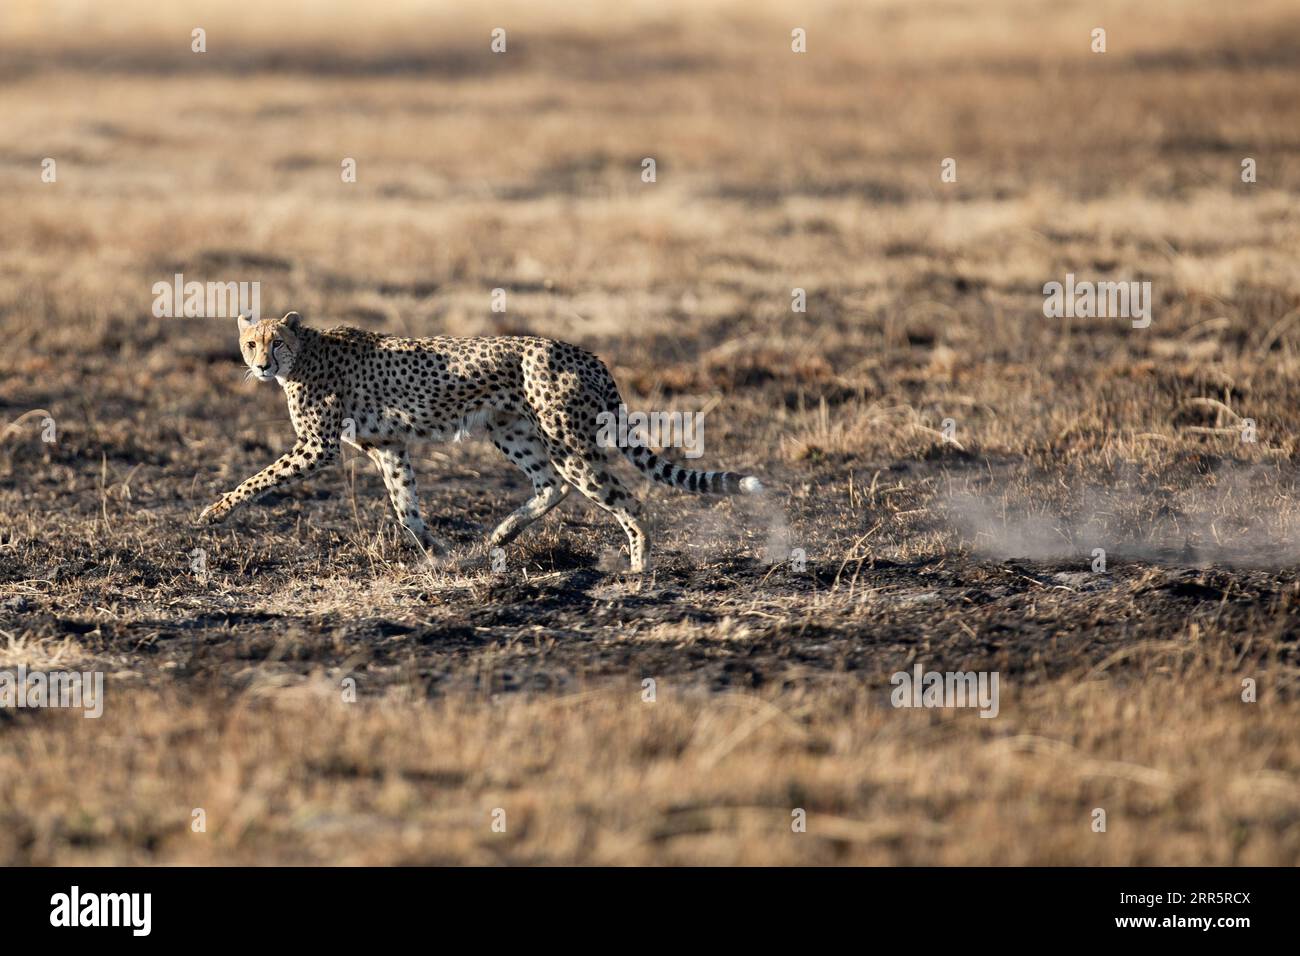 A slender and fast Cheetah makes its way across an open plain as it hunts in the wooded areas of the Okavango Delta, Botswana. Stock Photo